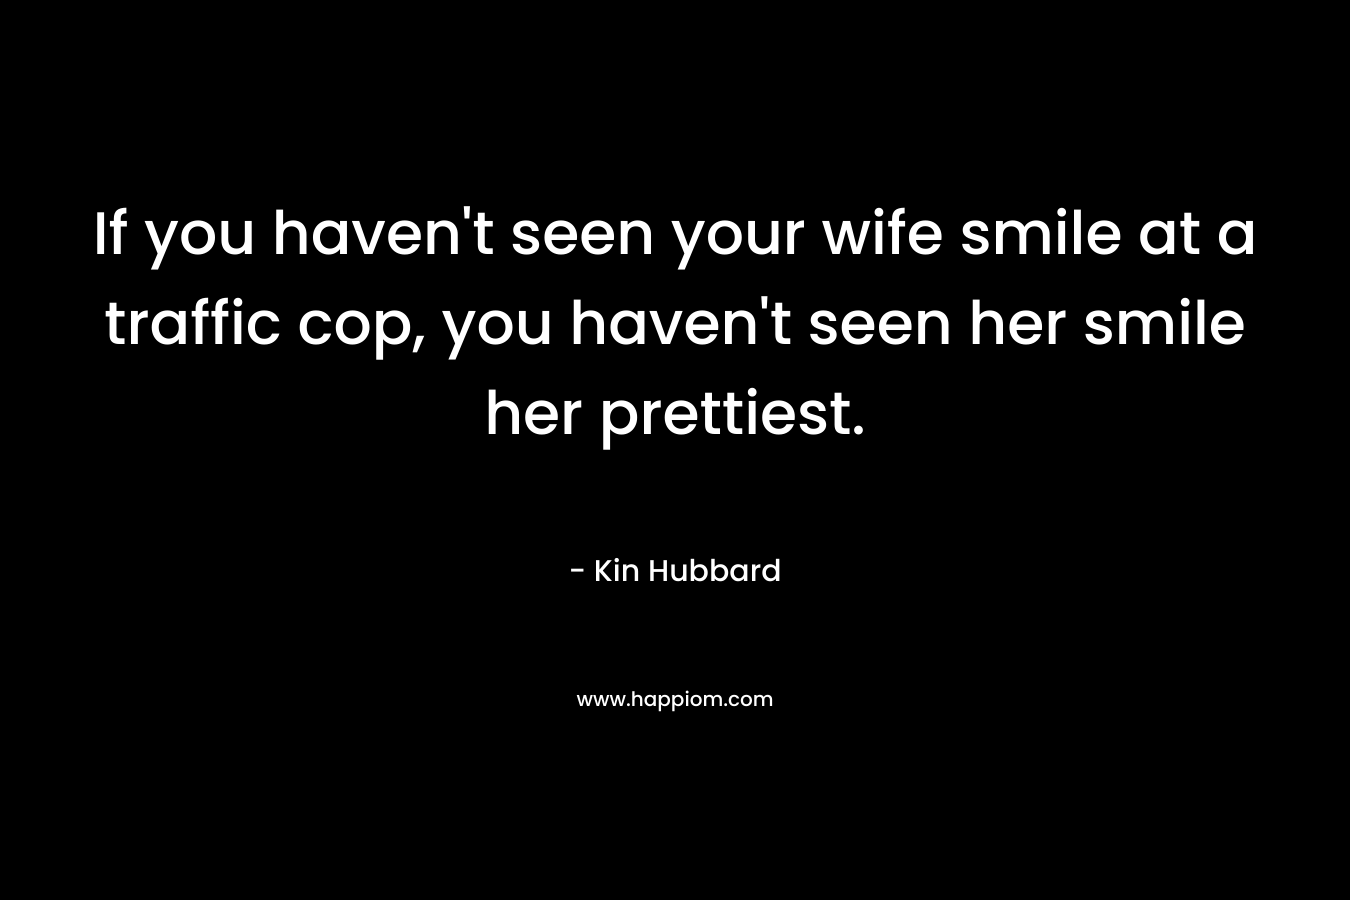 If you haven’t seen your wife smile at a traffic cop, you haven’t seen her smile her prettiest. – Kin Hubbard